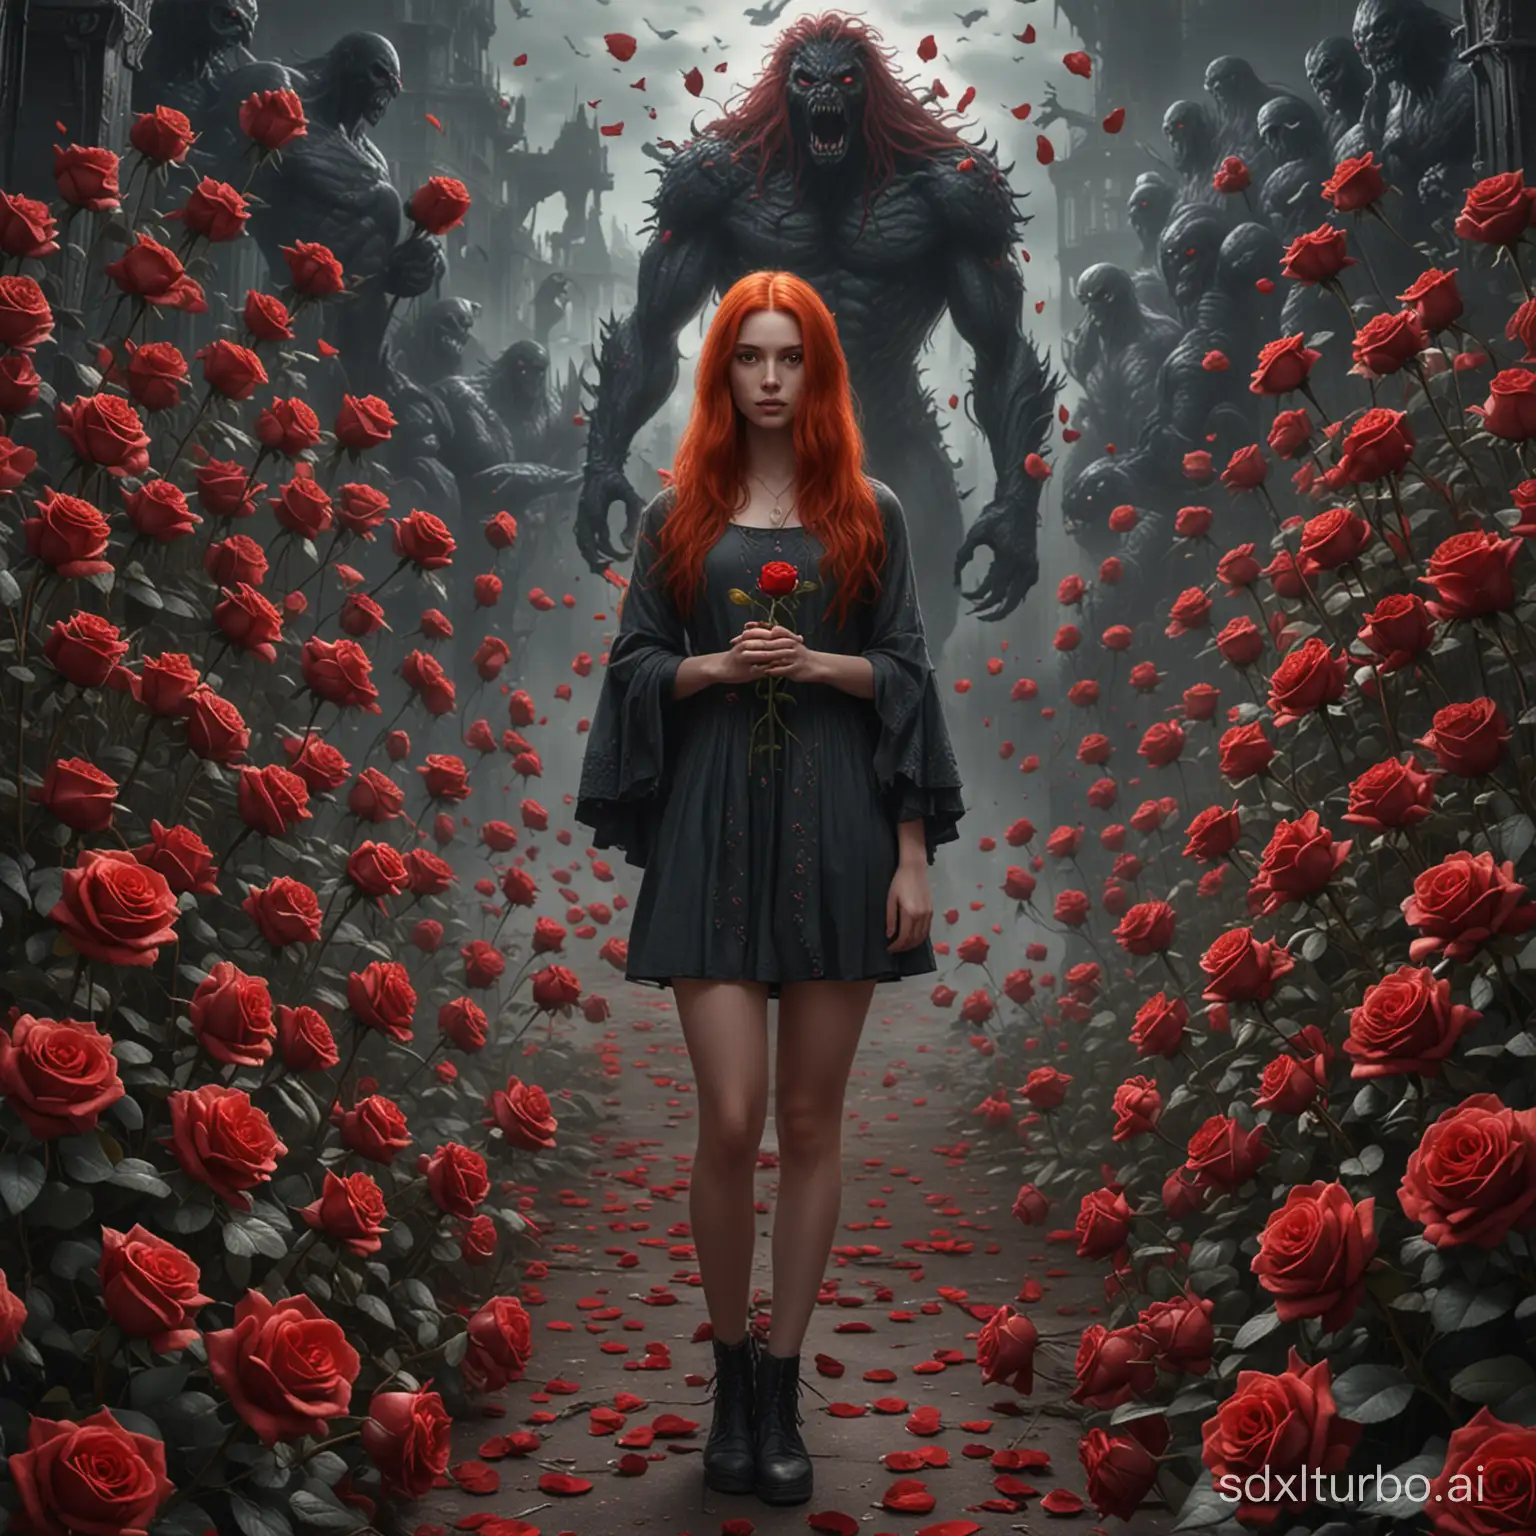 The girl with long red hair holds 101 roses in her hands. The girl stands against a backdrop of monsters in a realistic style.